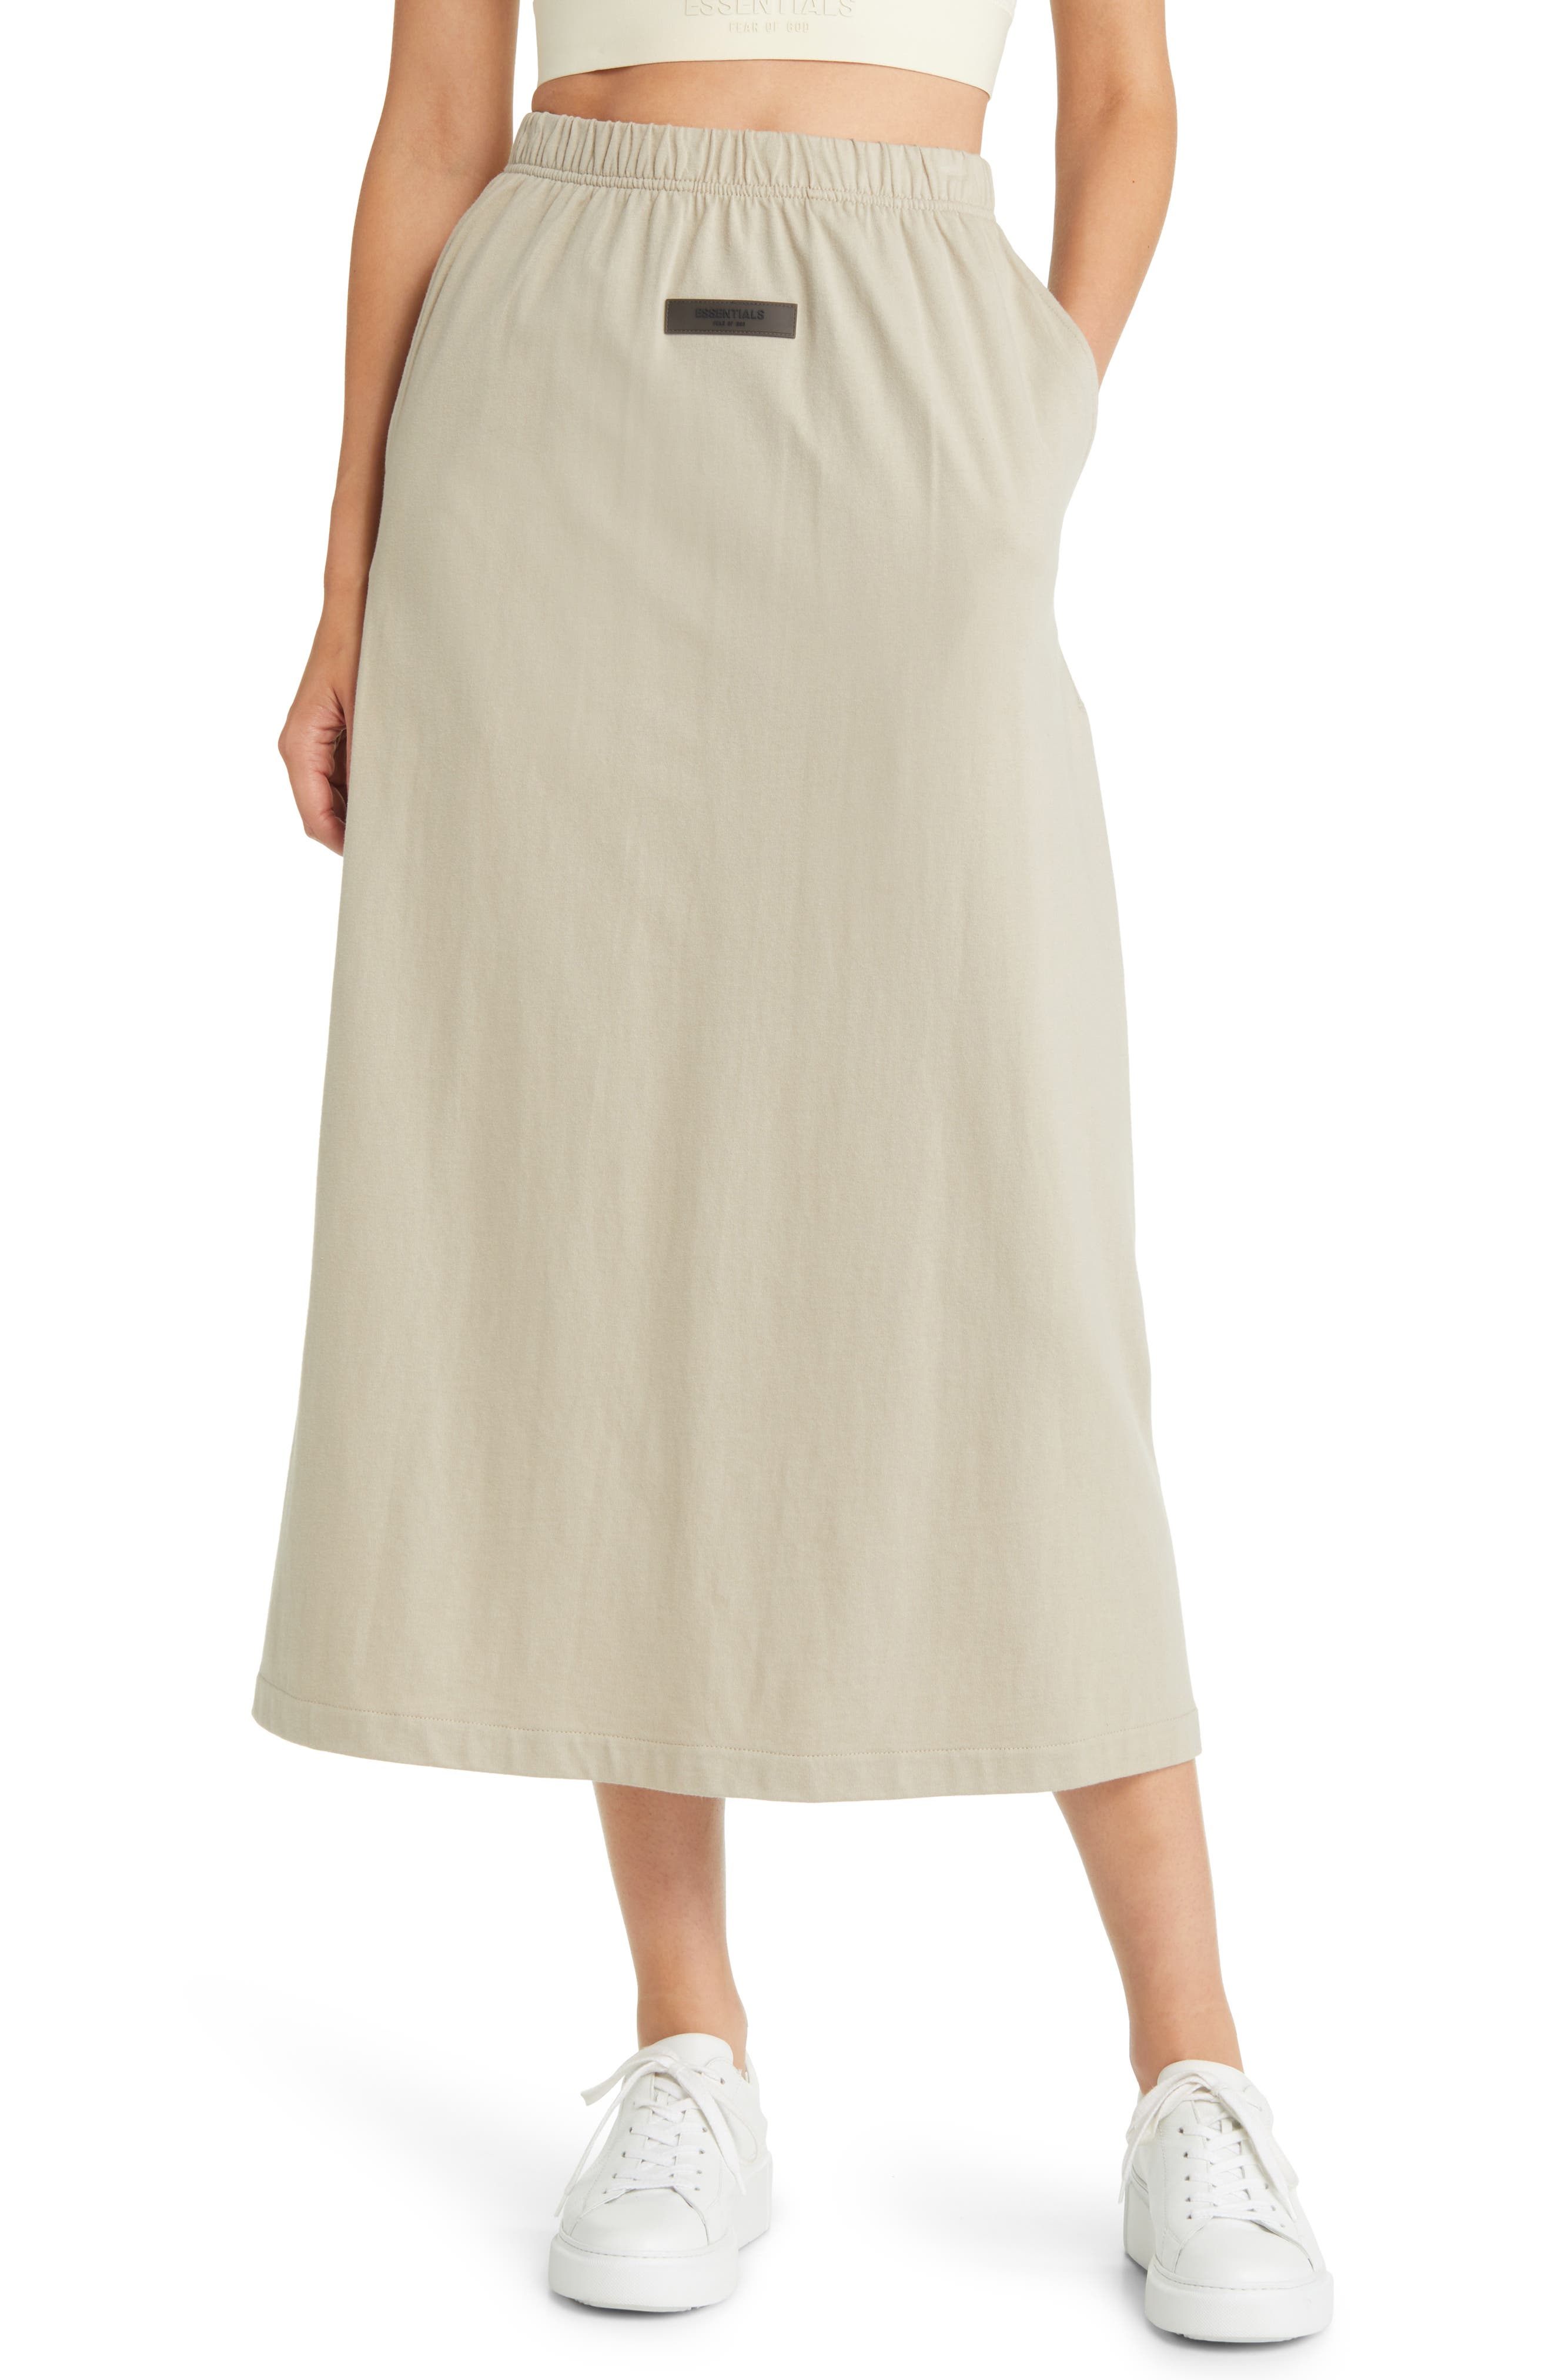 RHODE Audrey Cream Cotton Skirt in Natural Womens Clothing Skirts Mid-length skirts 